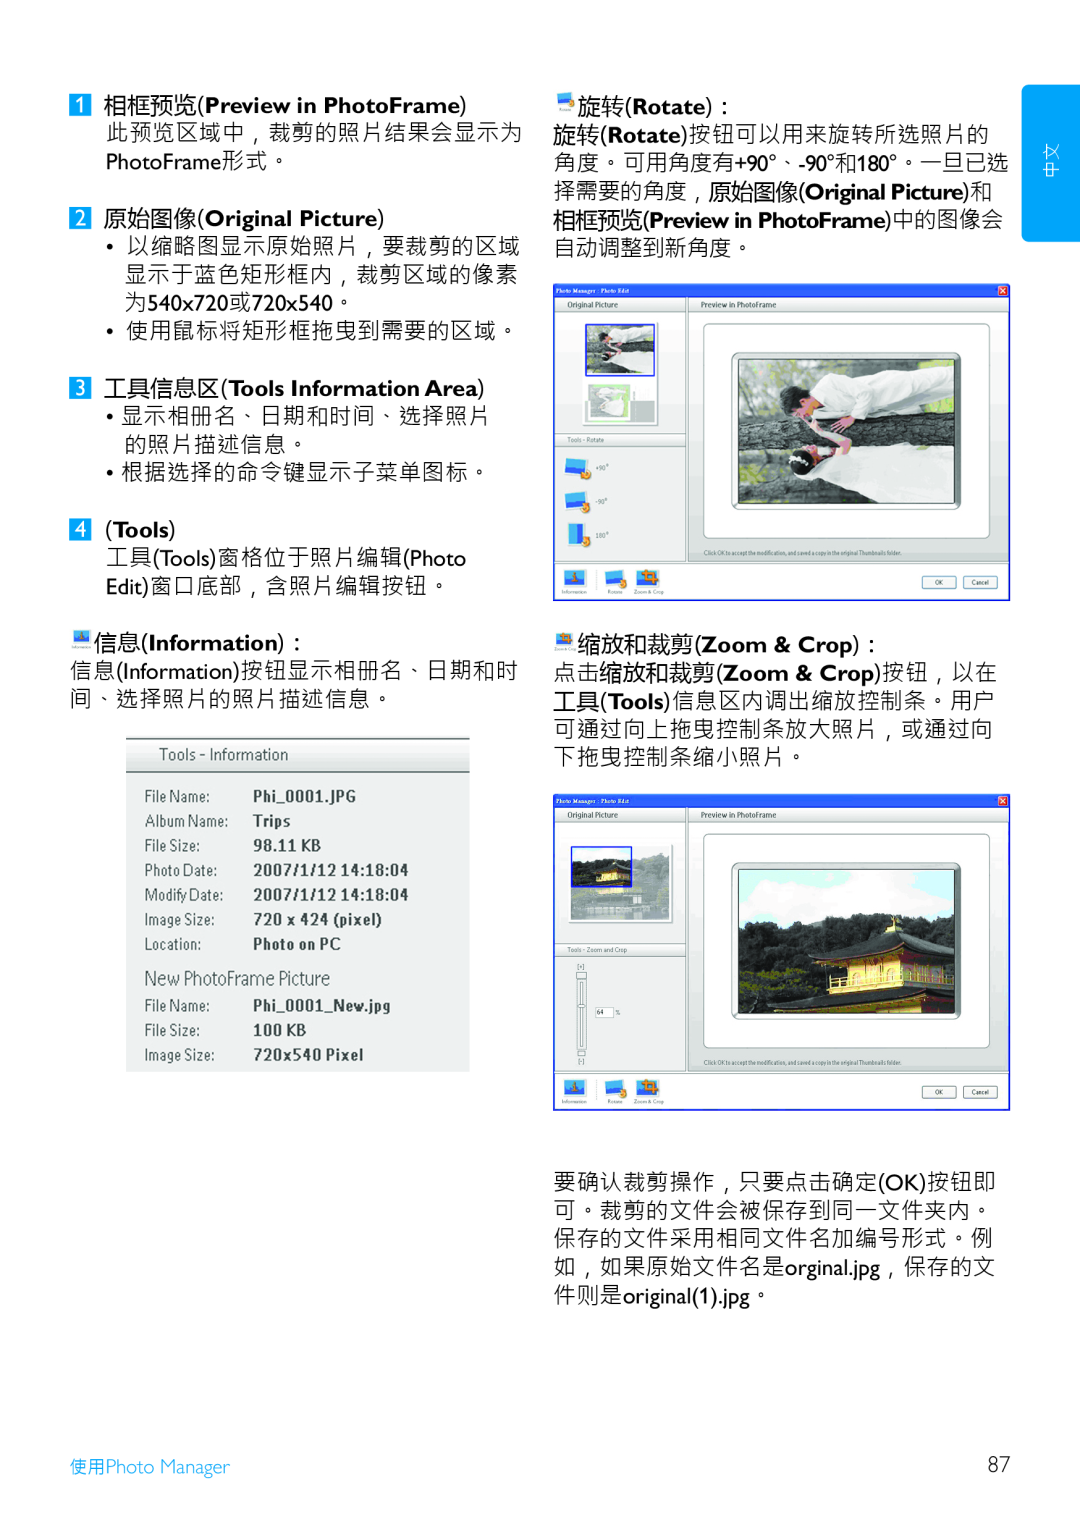 Philips 10FF2, 5FF2 1 相框预览Preview in PhotoFrame, 2 原始图像Original Picture, 3 工具信息区Tools Information Area, 信息Information： 